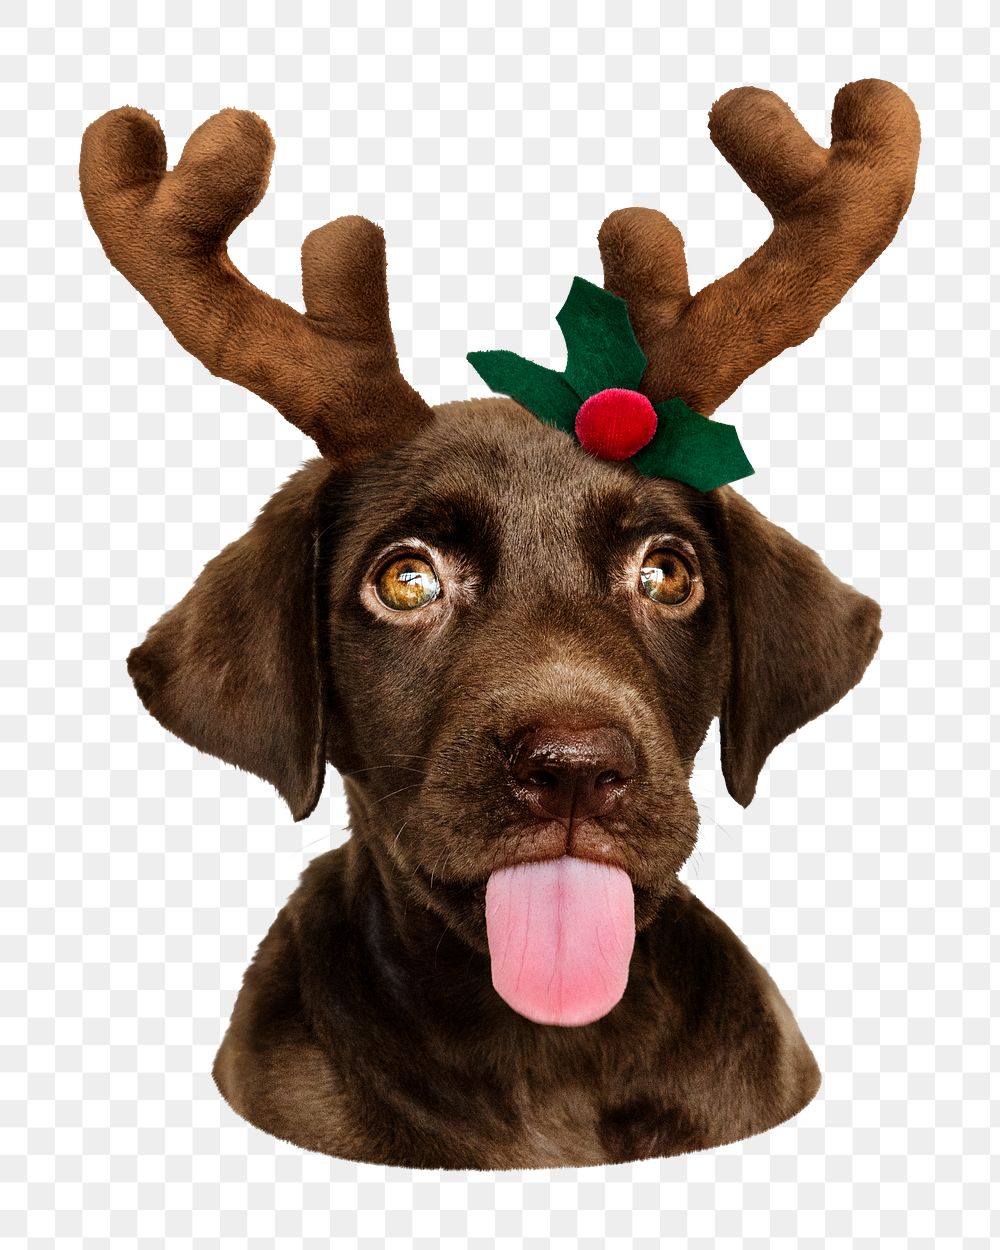 Puppy with Christmas headband png sticker, transparent background